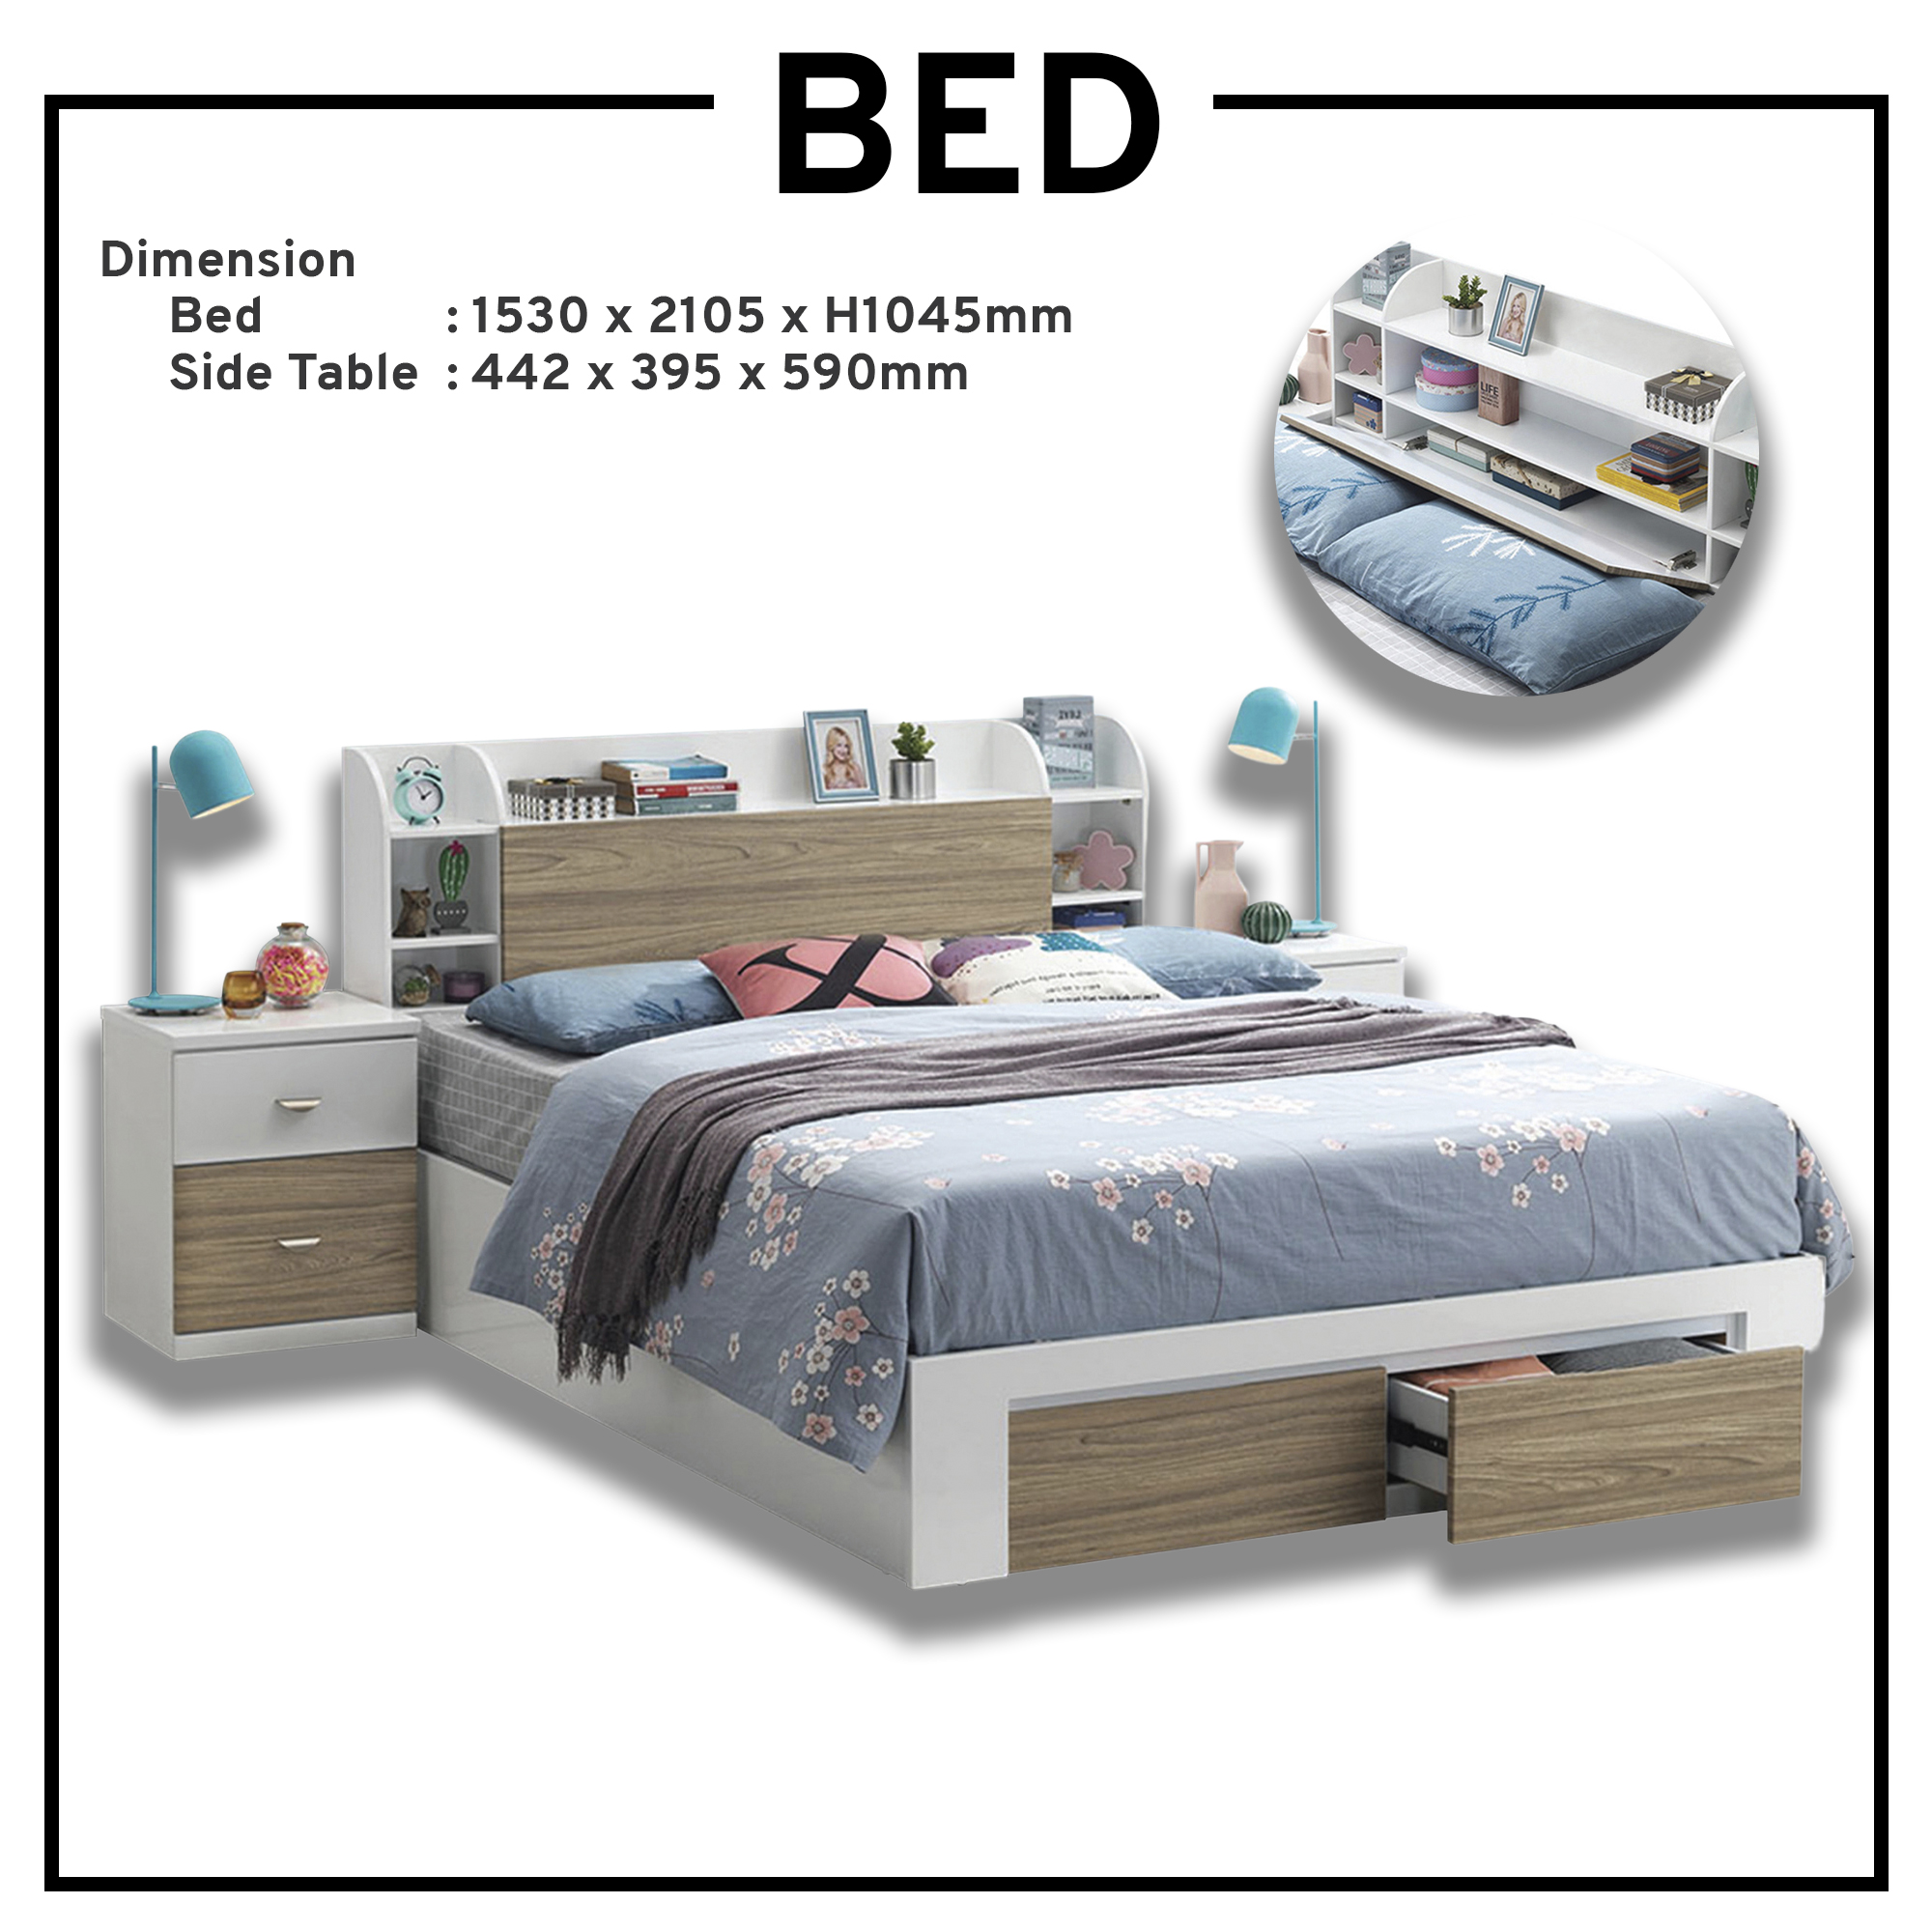 Bed 11